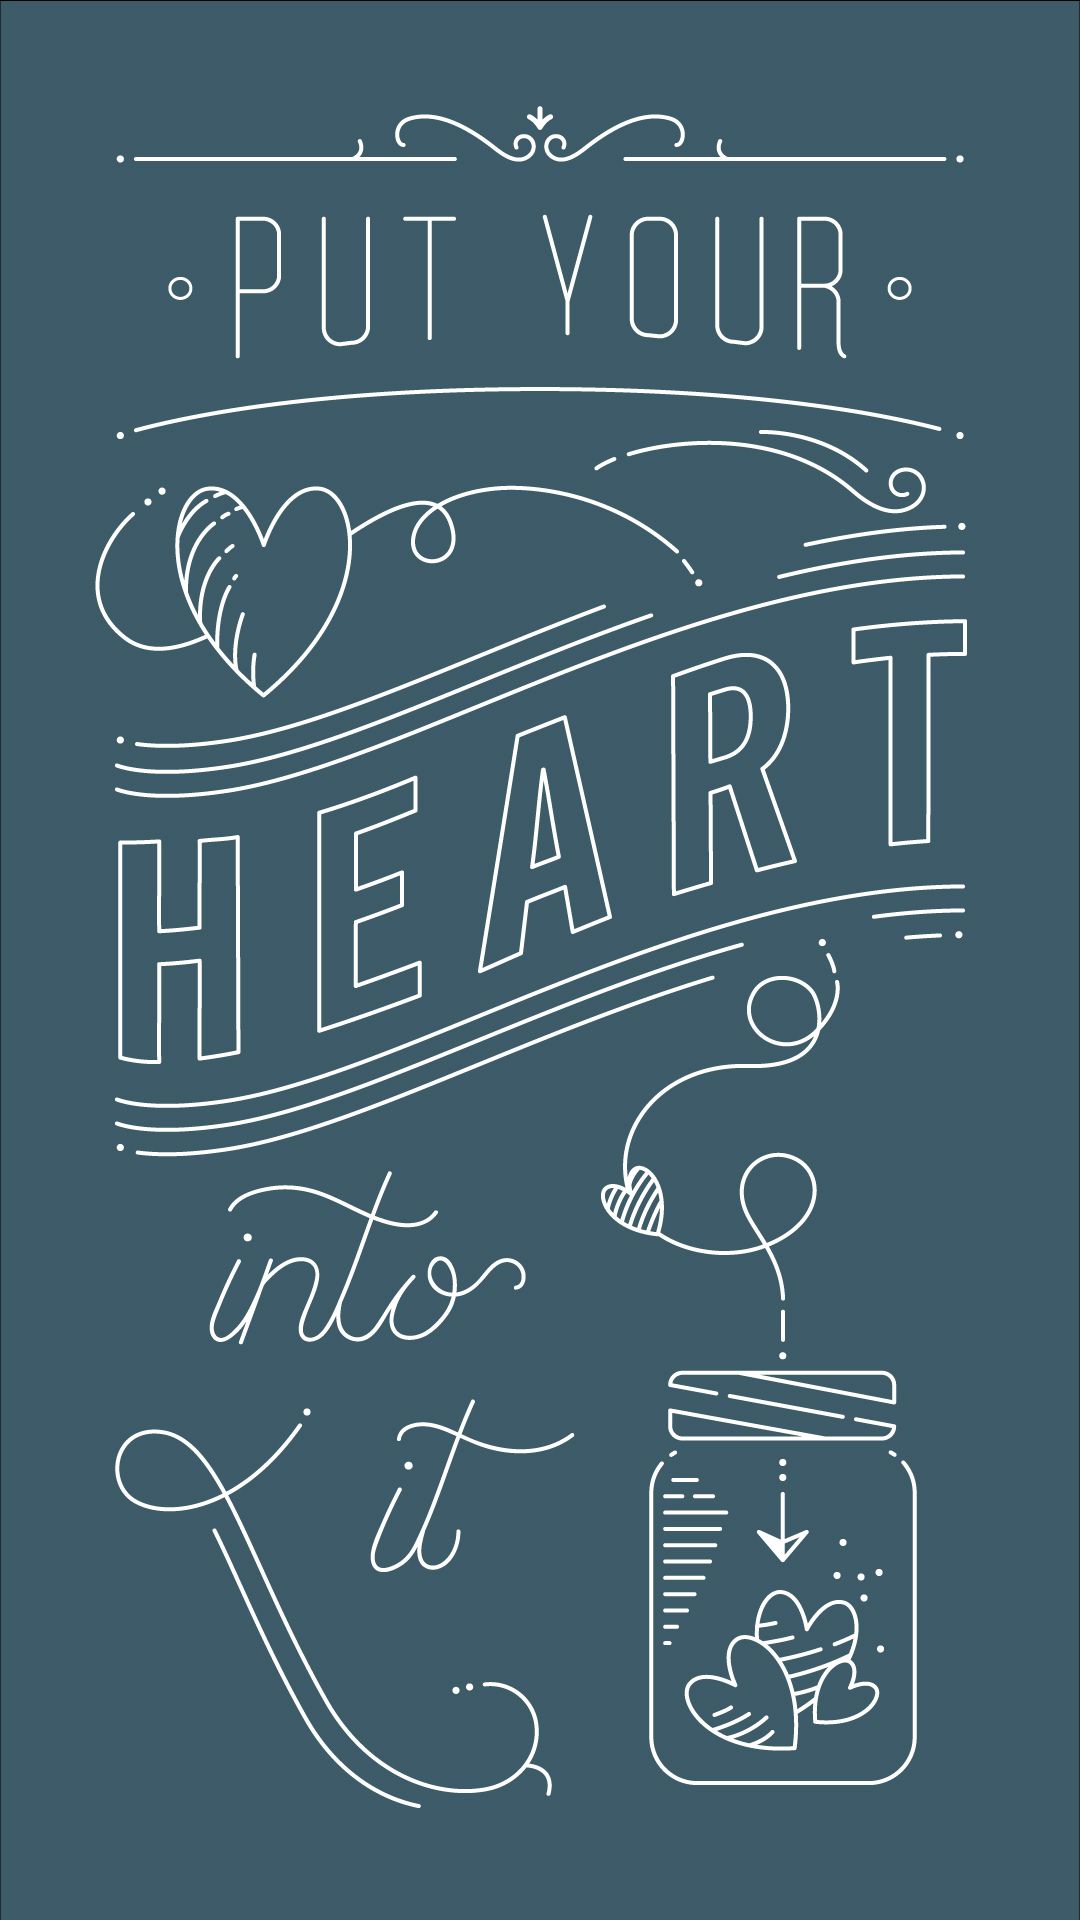 Put Your Heart Into It Wallpaper for your HTC - HTC Blog